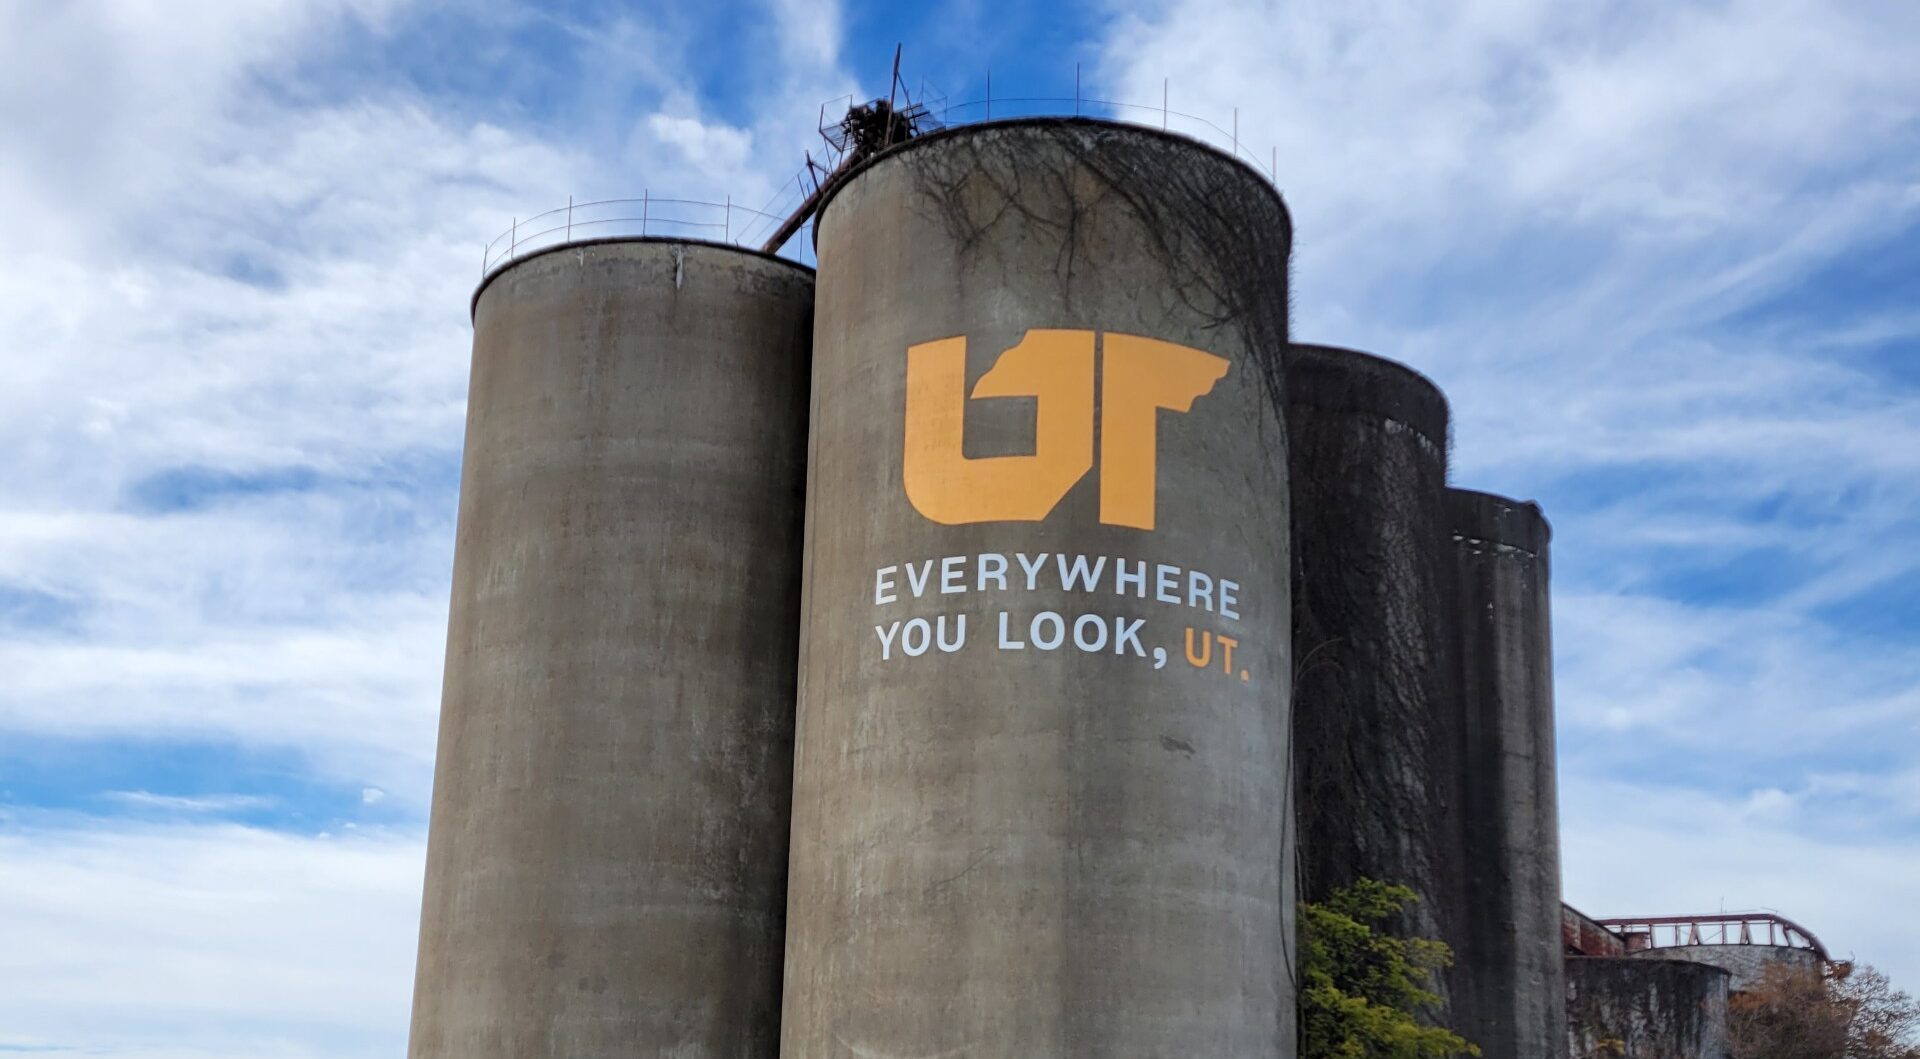 Orange and white "Everywhere You Look, UT" mural painted on concrete grain silo